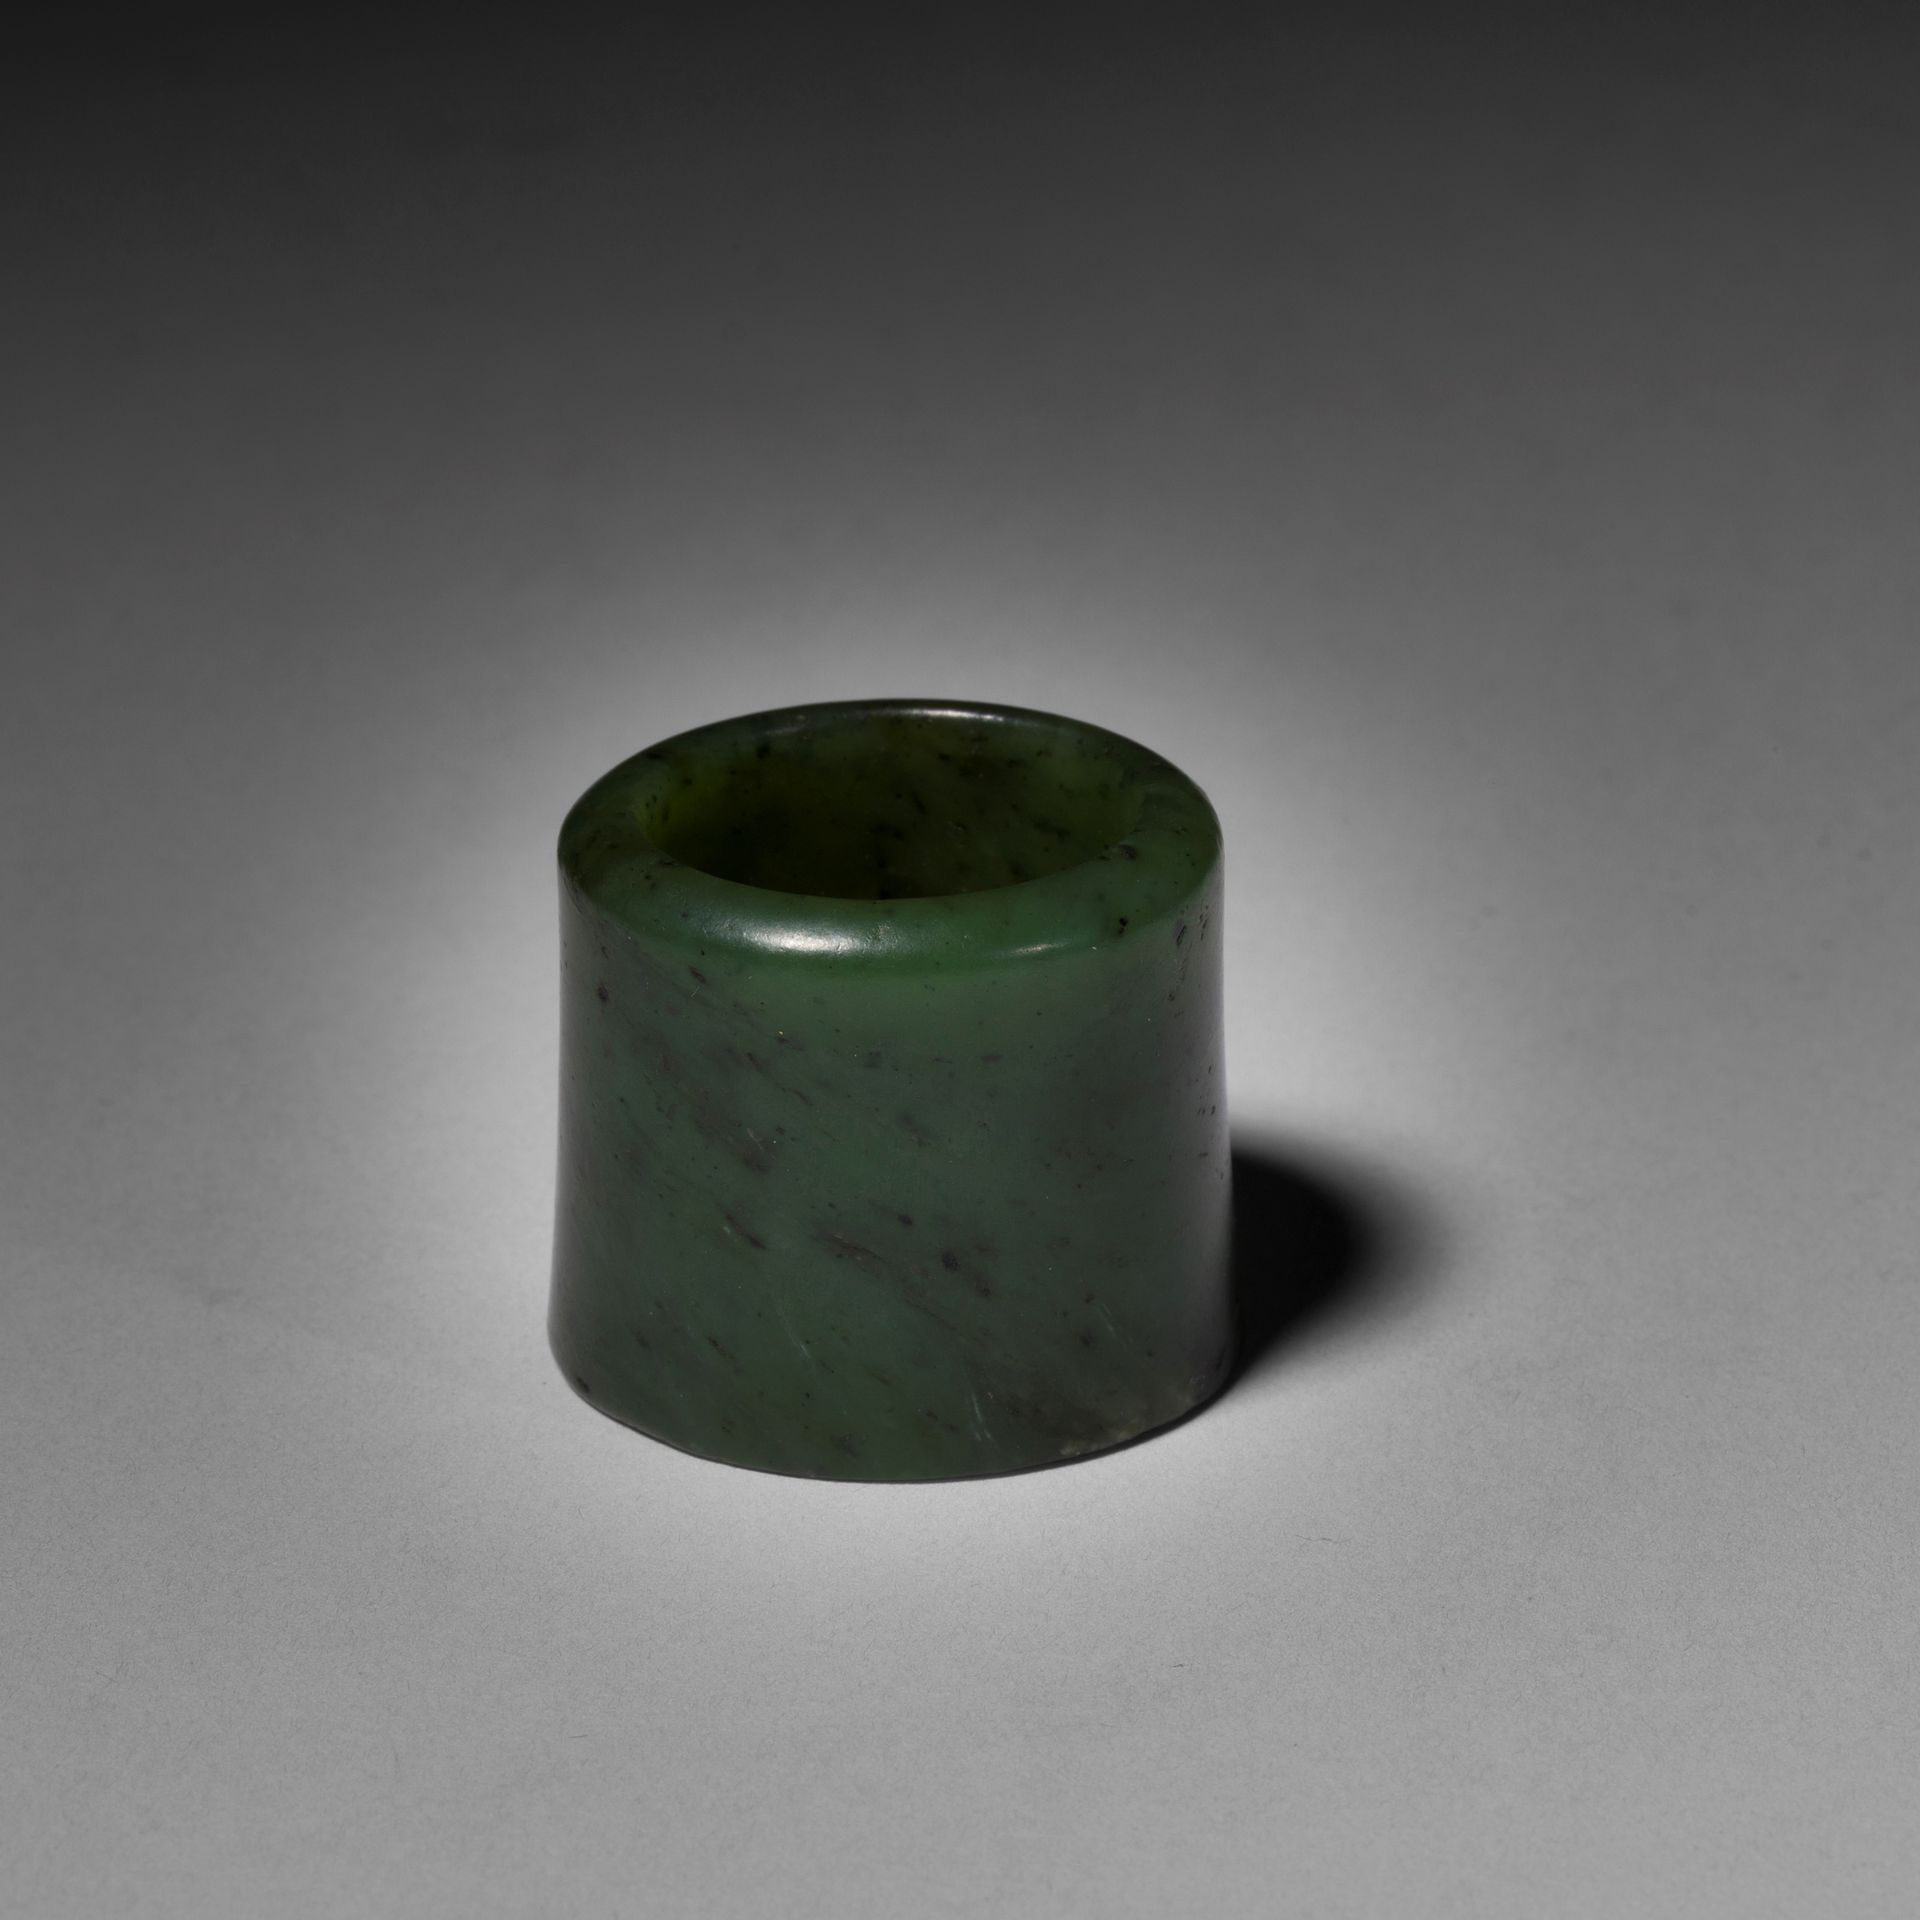 Null An archer's ring

China

Polished jade, beautiful patina

H. 2,5 cm

Proven&hellip;